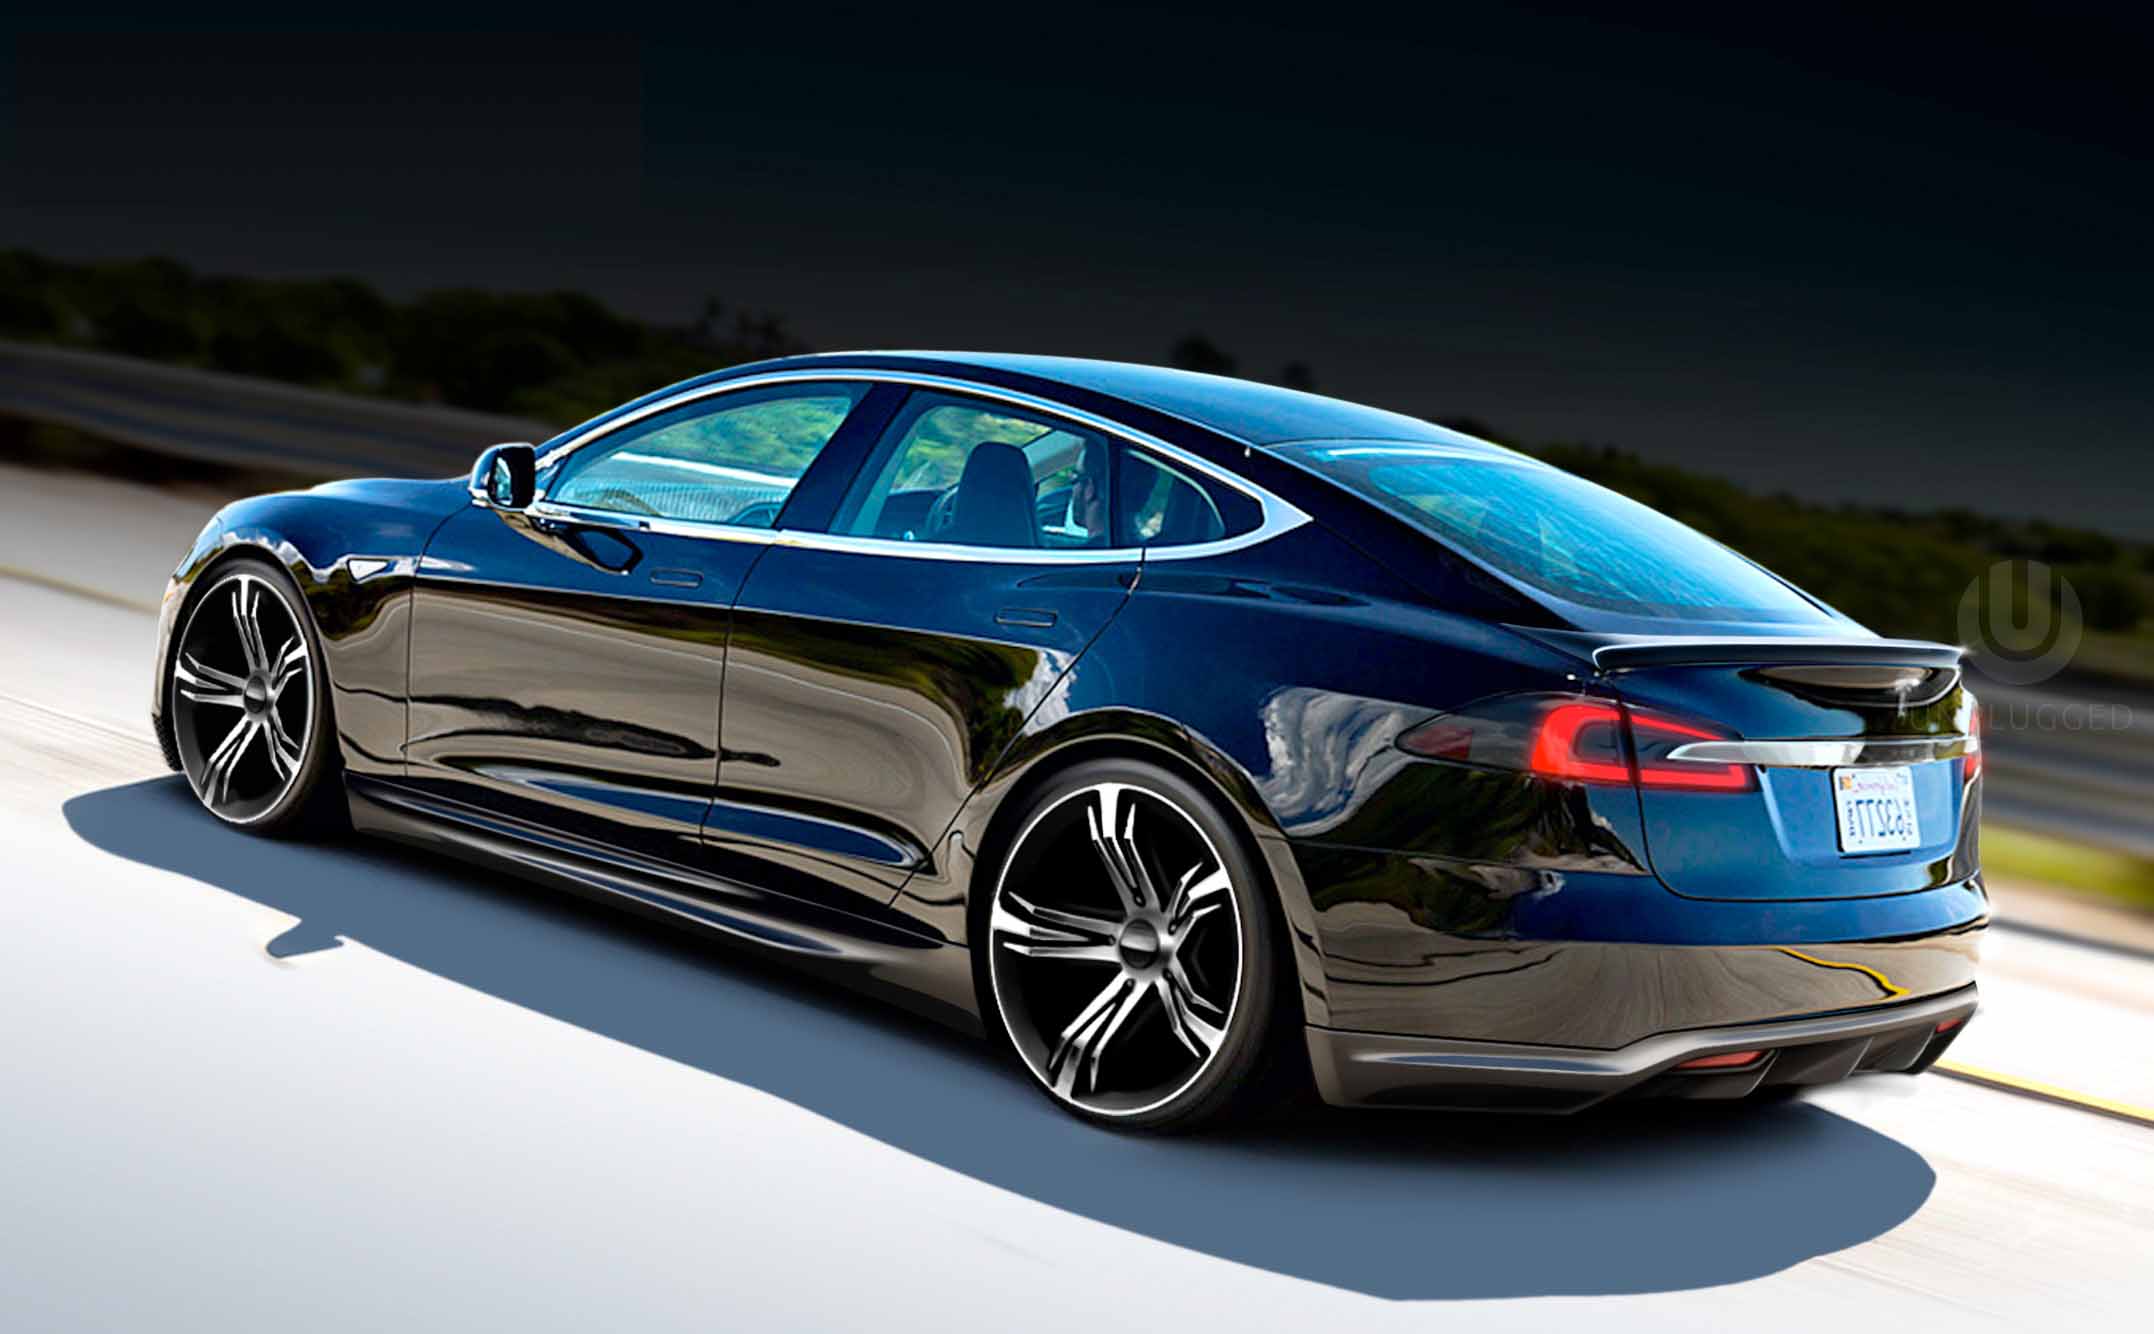 Tesla Model S Wallpaper HD Photo, Wallpaper and other Image